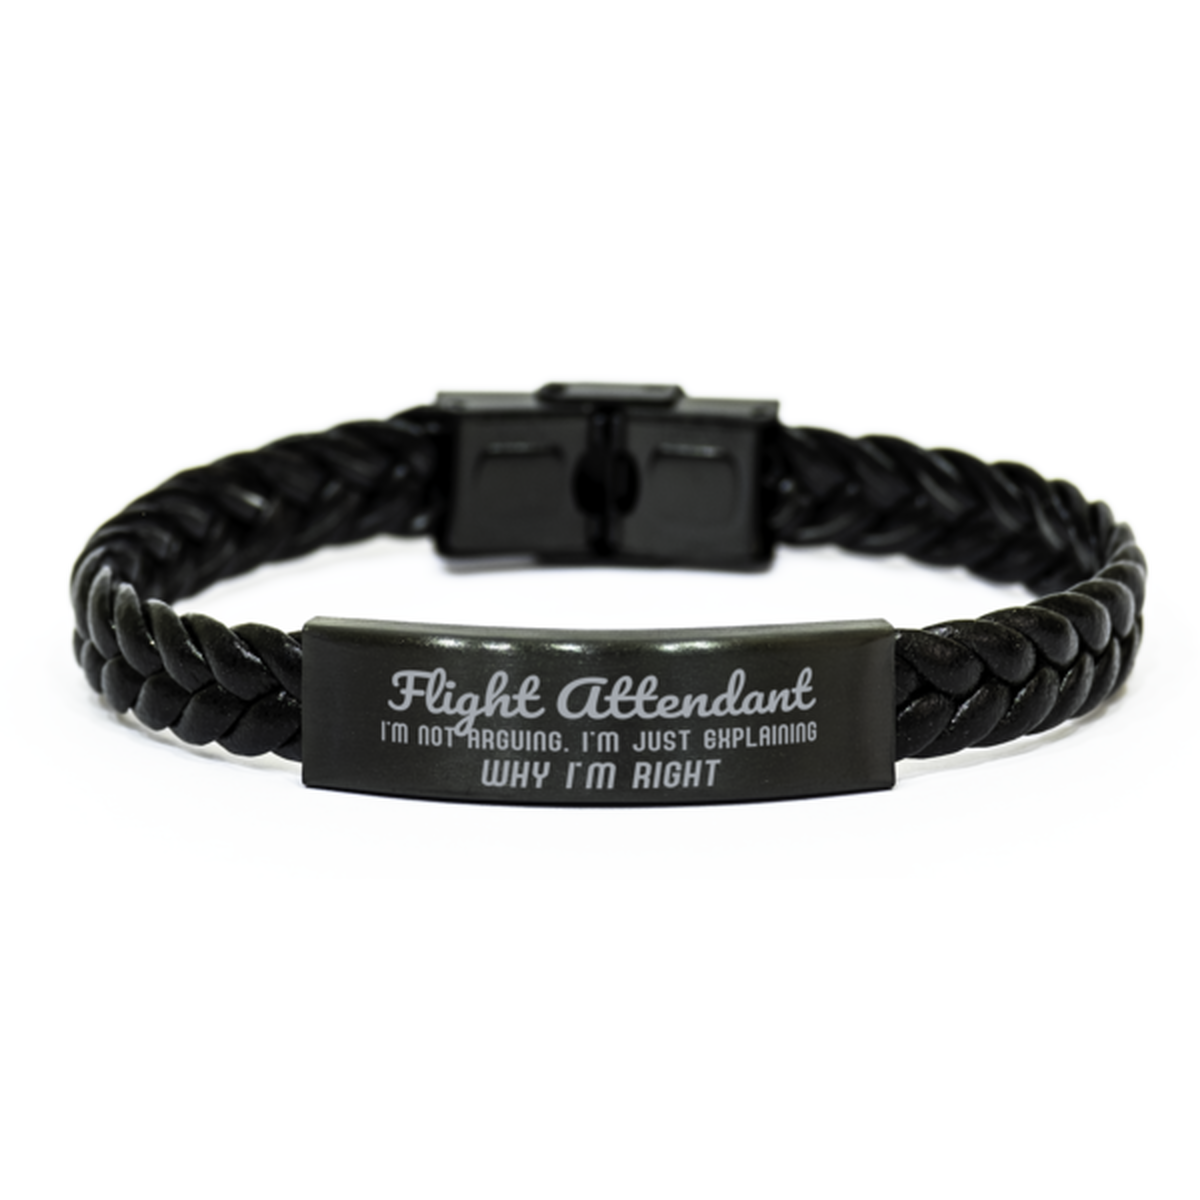 Flight Attendant I'm not Arguing. I'm Just Explaining Why I'm RIGHT Braided Leather Bracelet, Graduation Birthday Christmas Flight Attendant Gifts For Flight Attendant Funny Saying Quote Present for Men Women Coworker